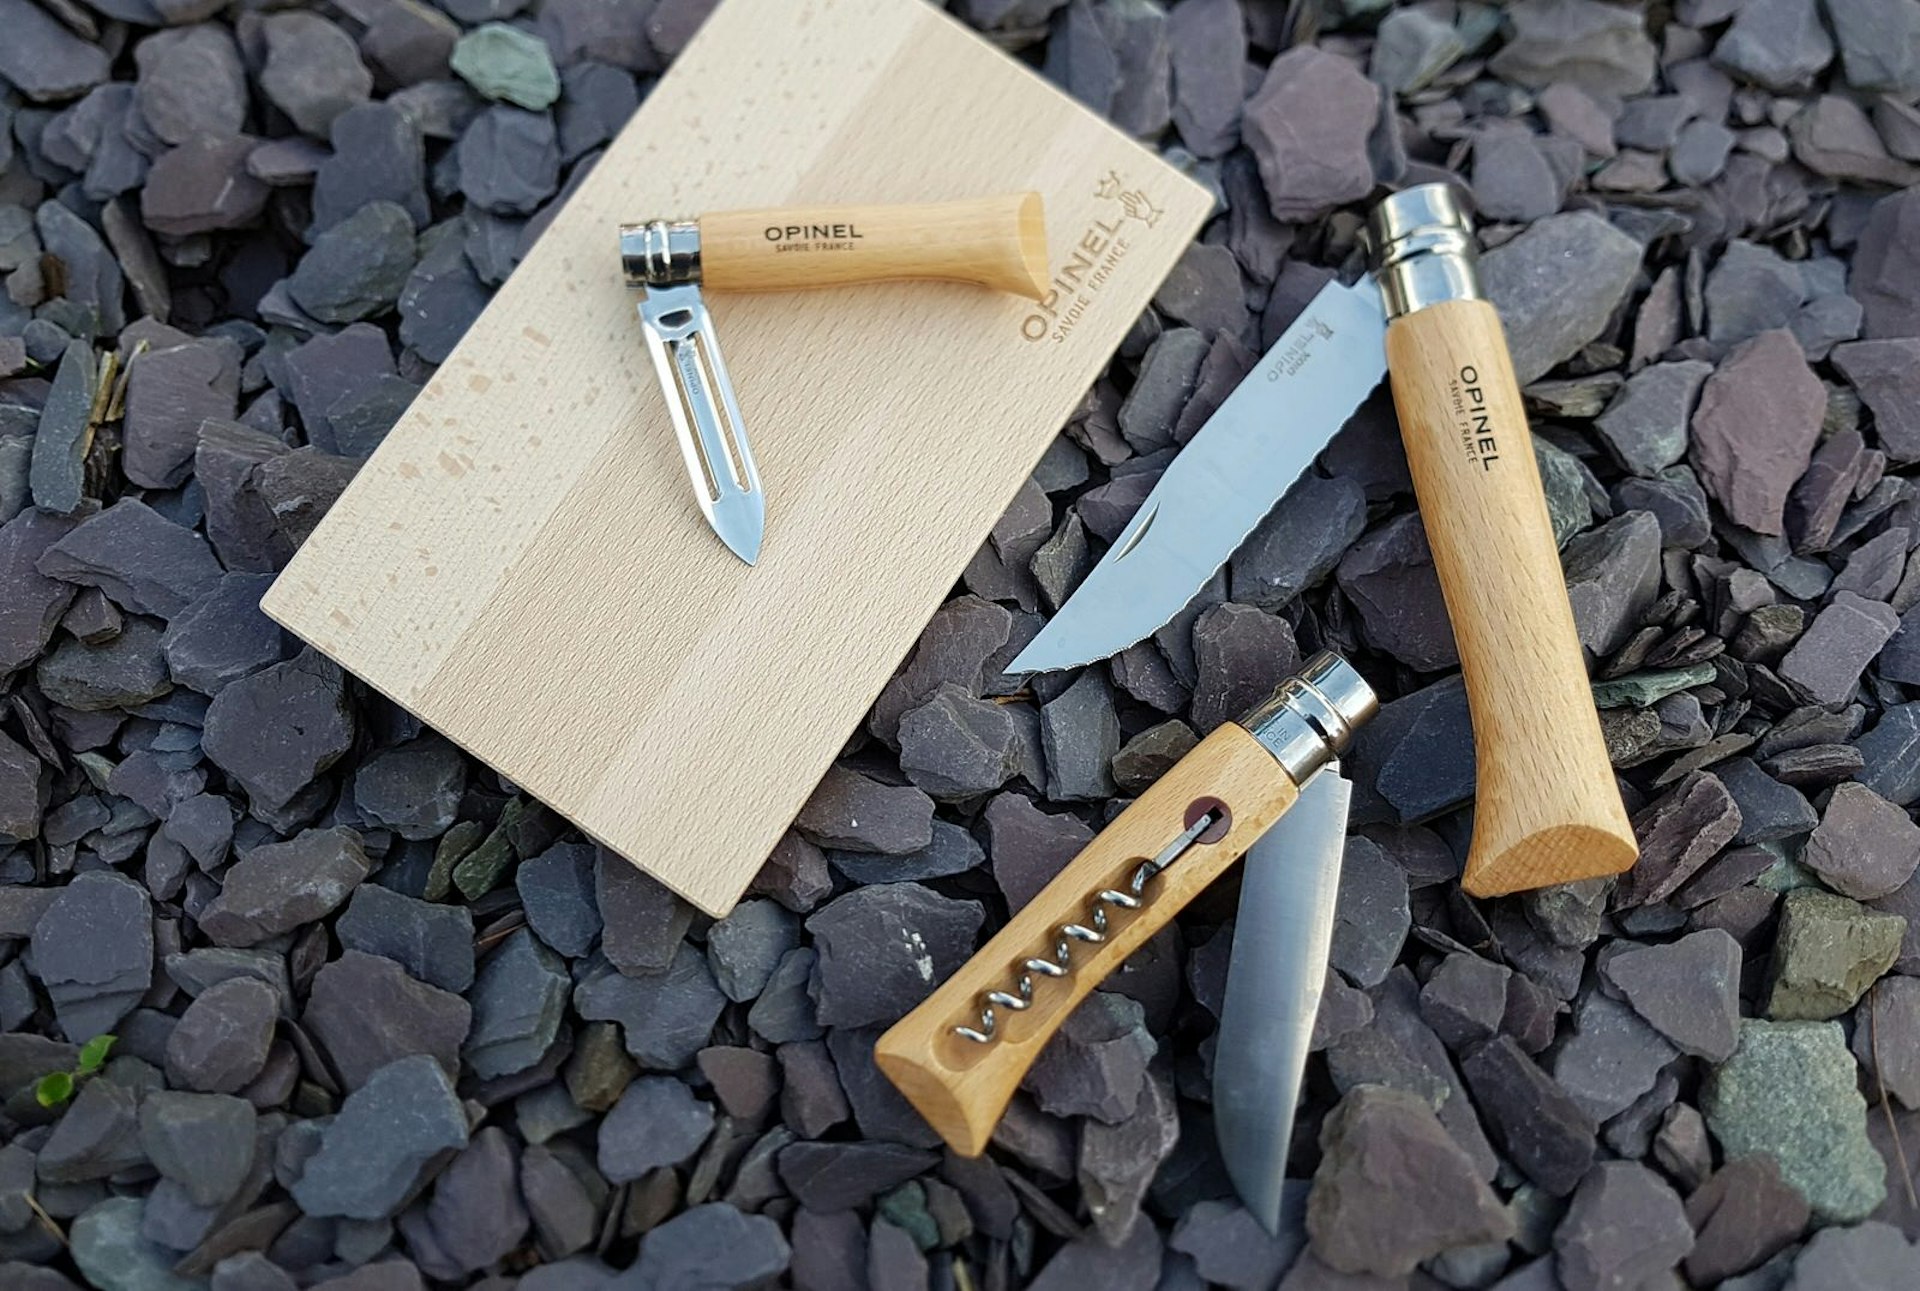 Opinel Nomad Cooking Kit, including two knives, vegetable peeler, chopping board and cork screw 